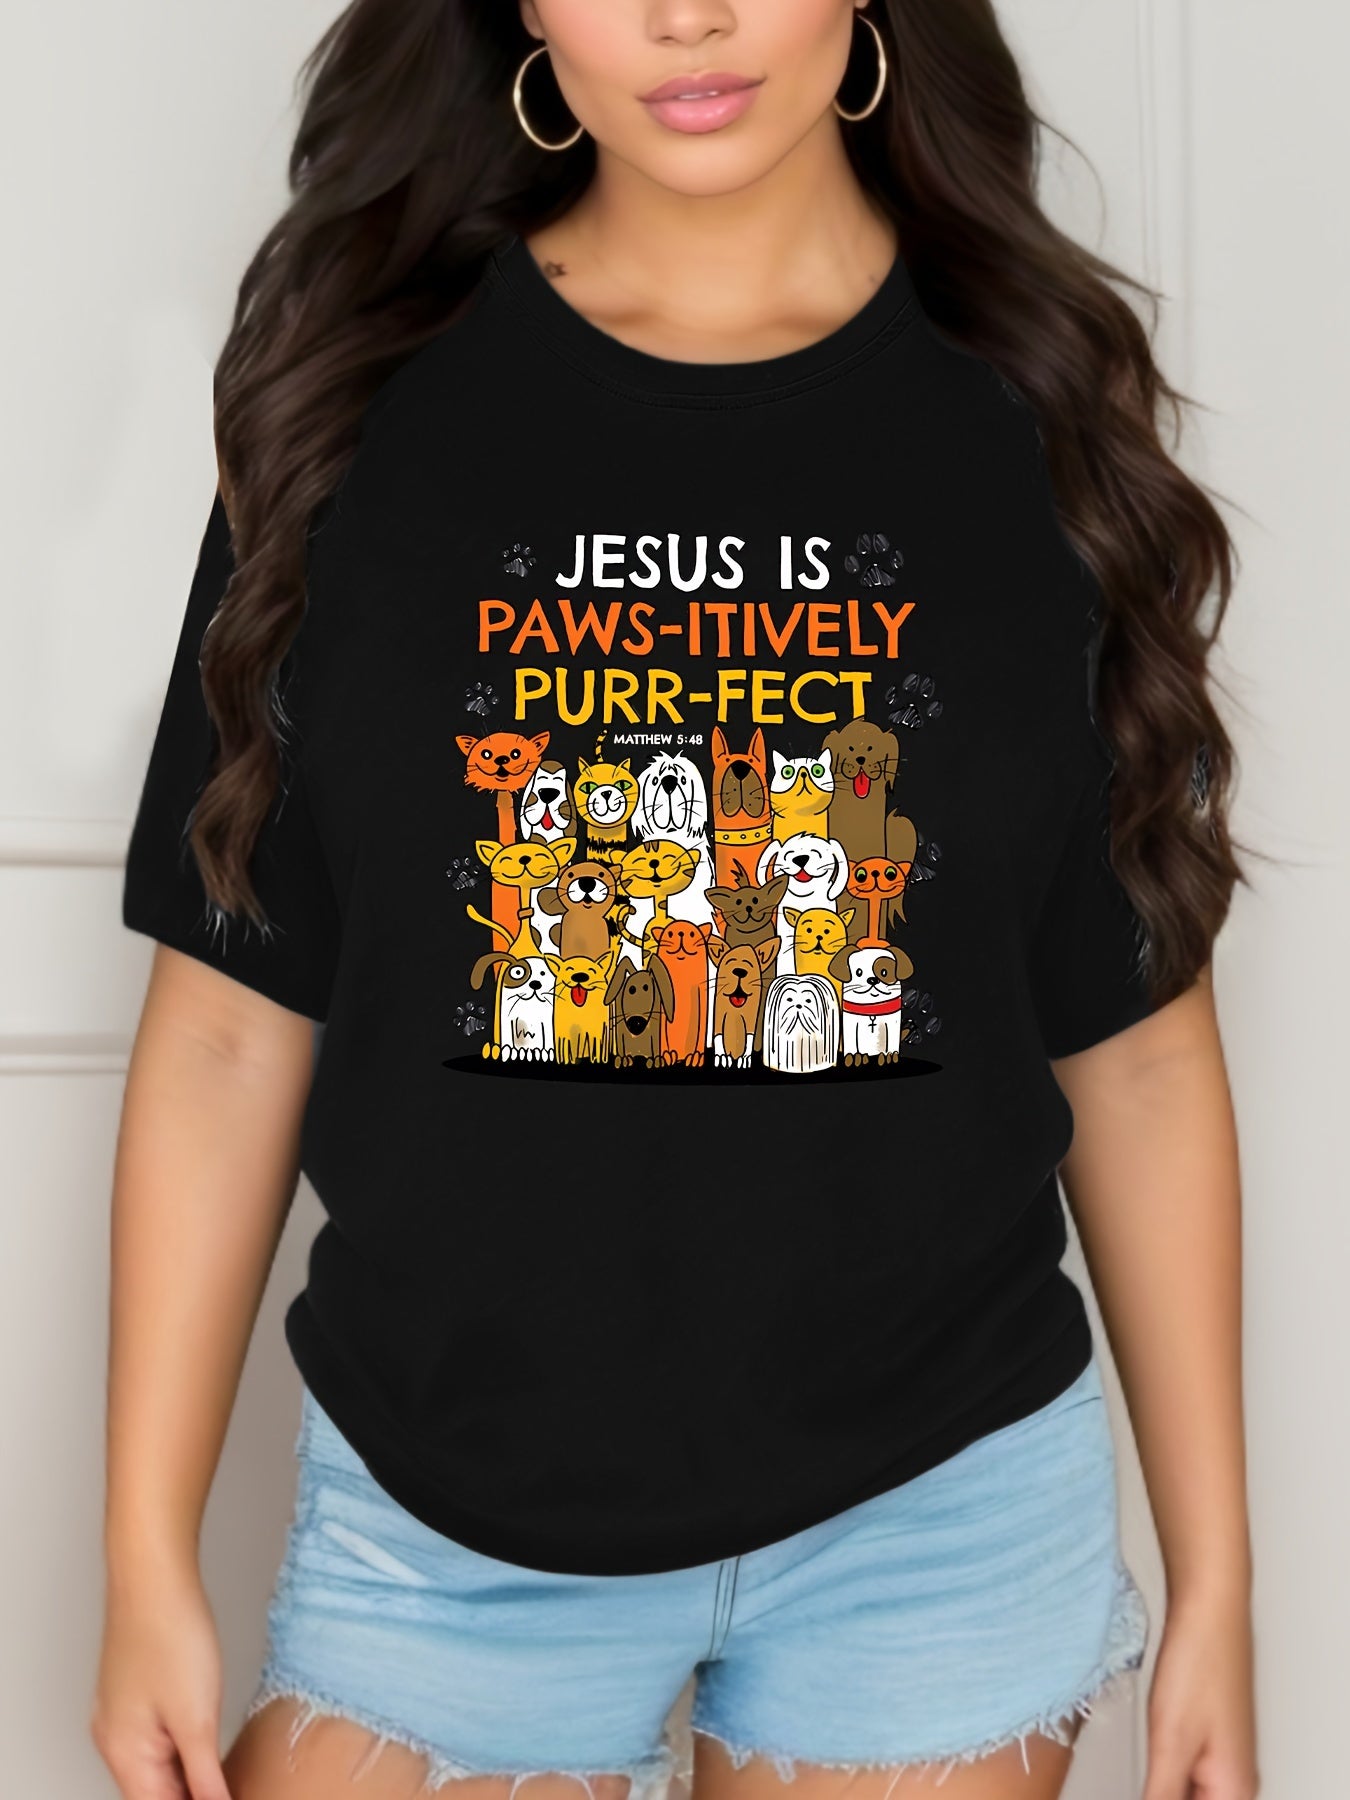 Jesus Is Paws-itively Purr-fect Women's Christian T-shirt claimedbygoddesigns